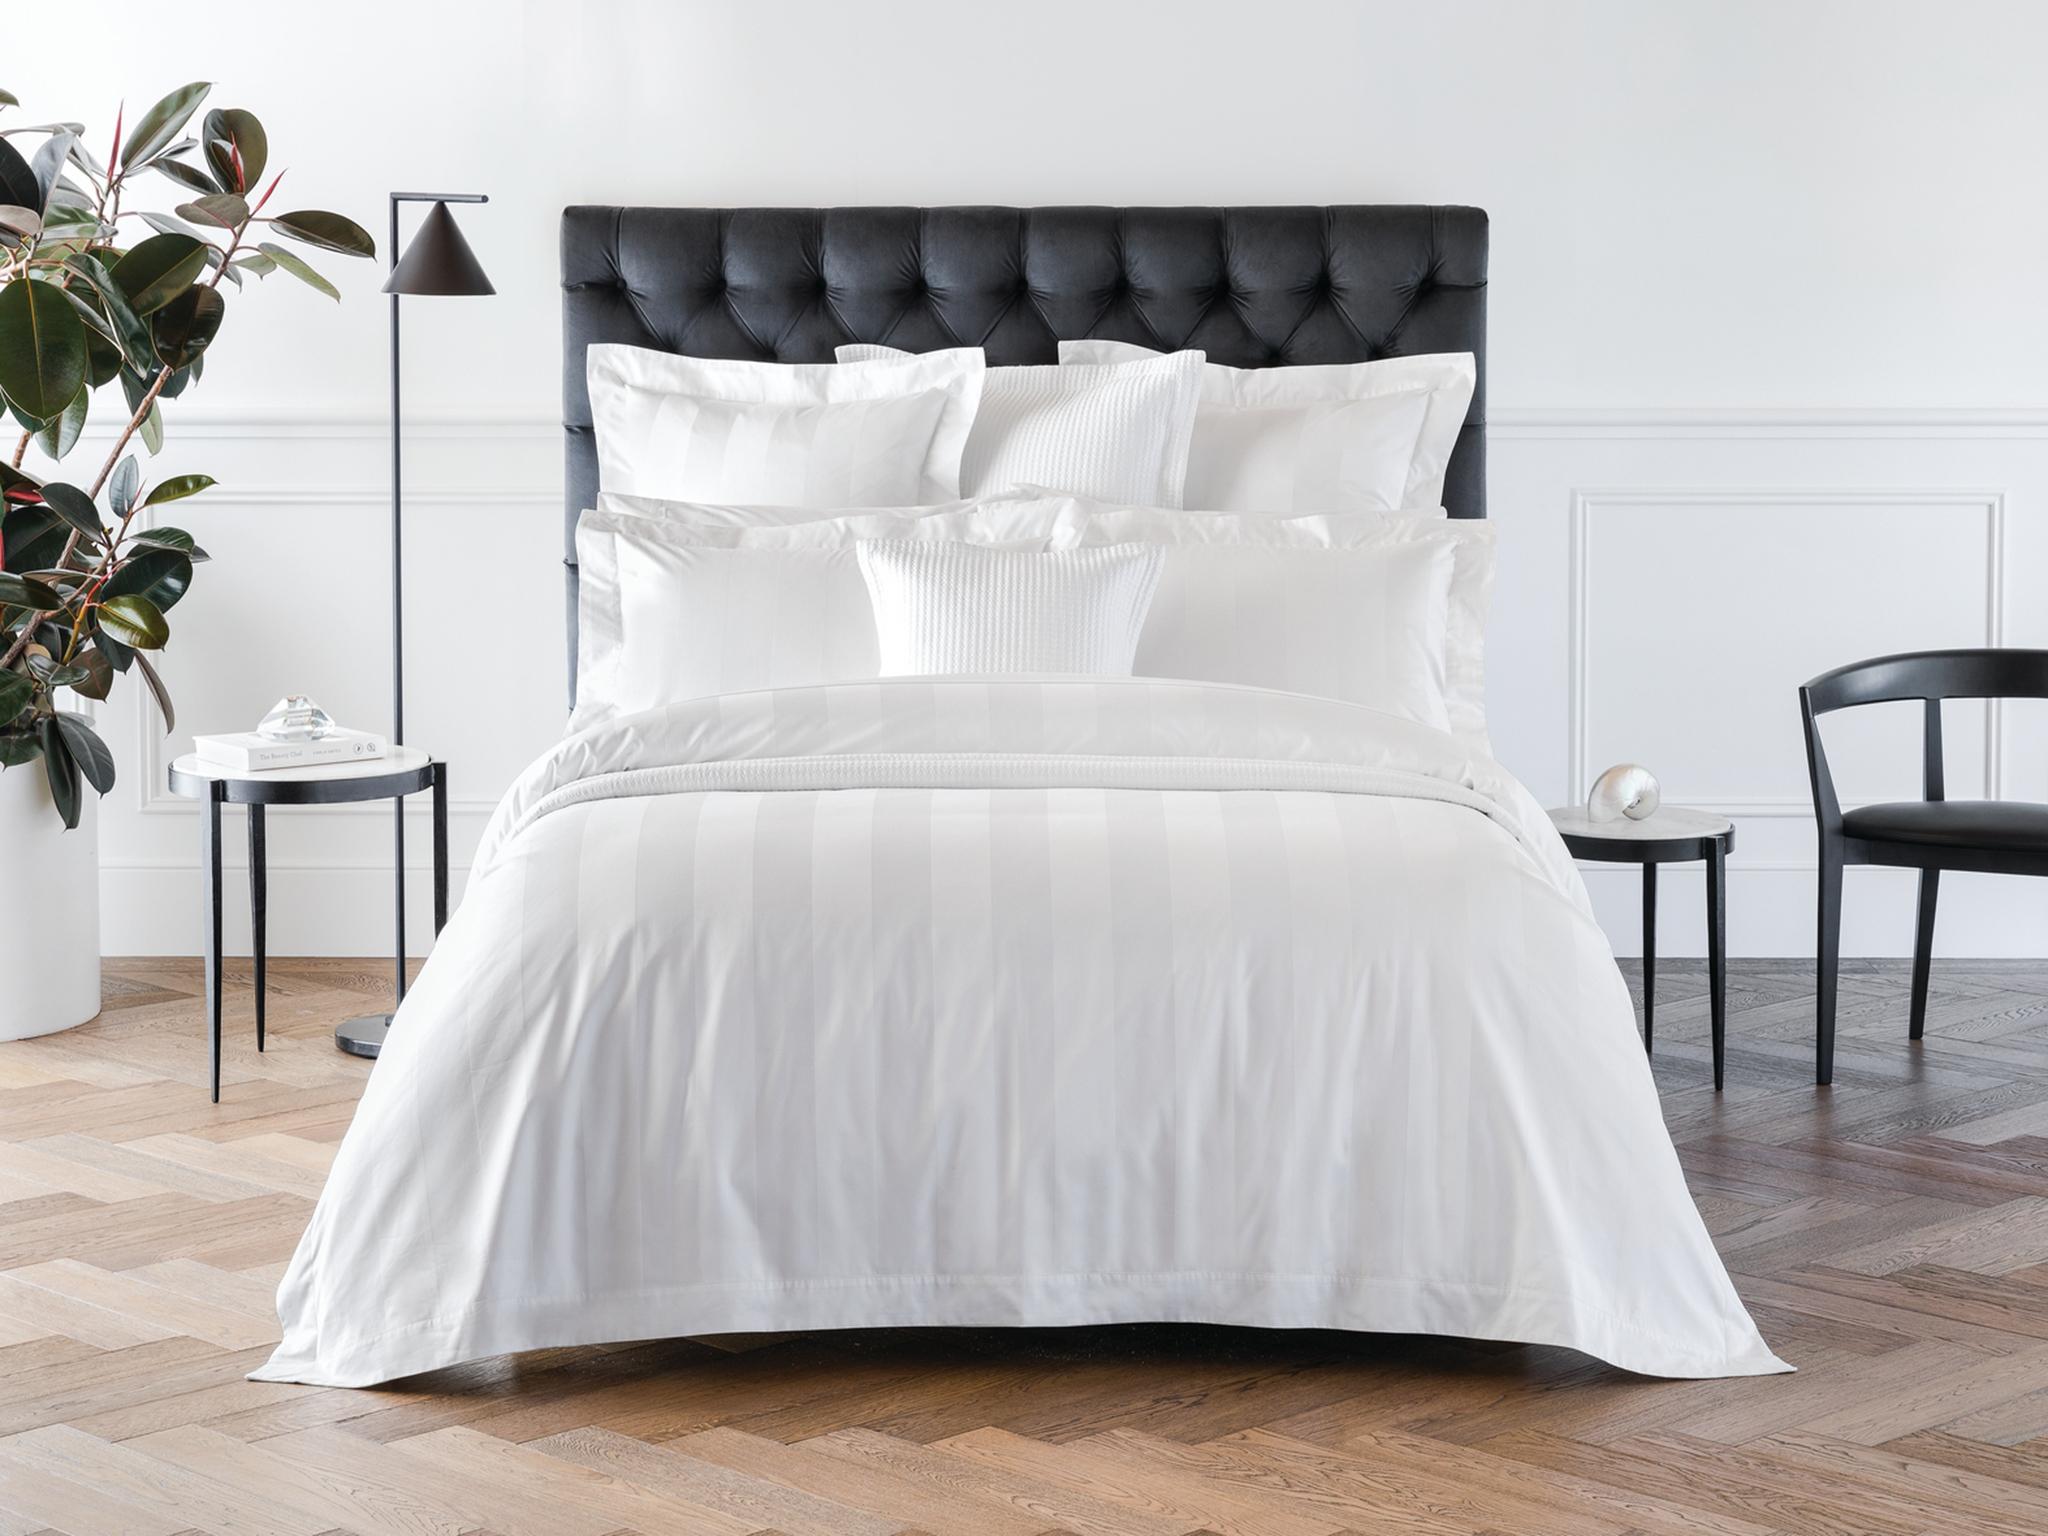 Make room for improvement with the Sheridan’s range of bed linen